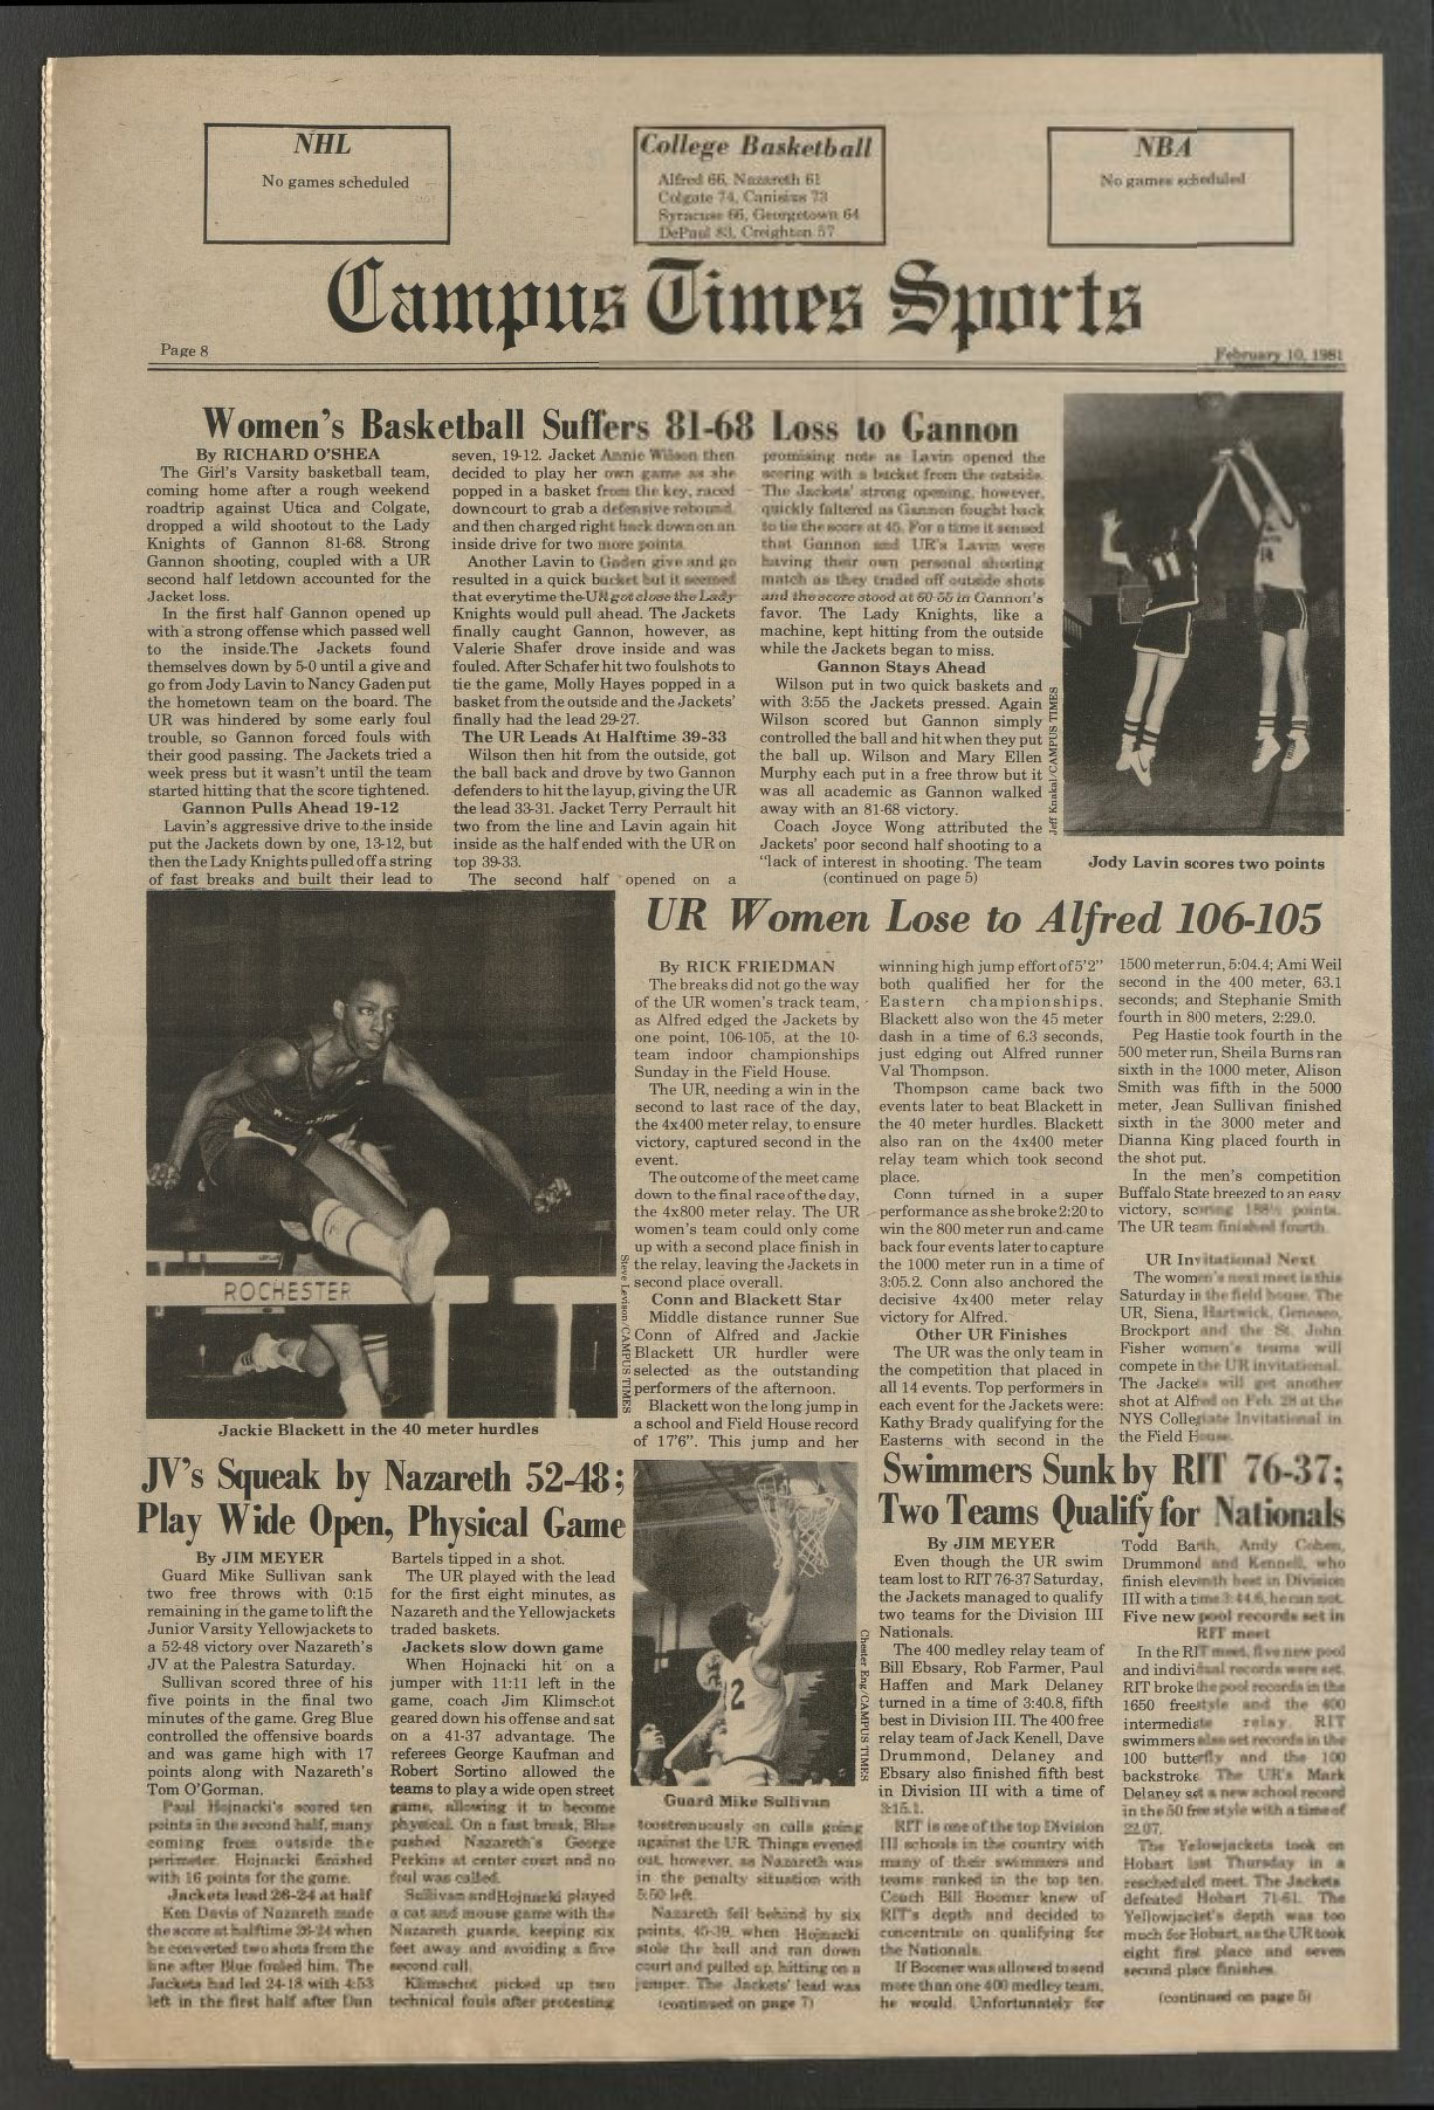 A scan of an article featuring Jackie Blackett ’81 from Campus Times on February 10, 1981.